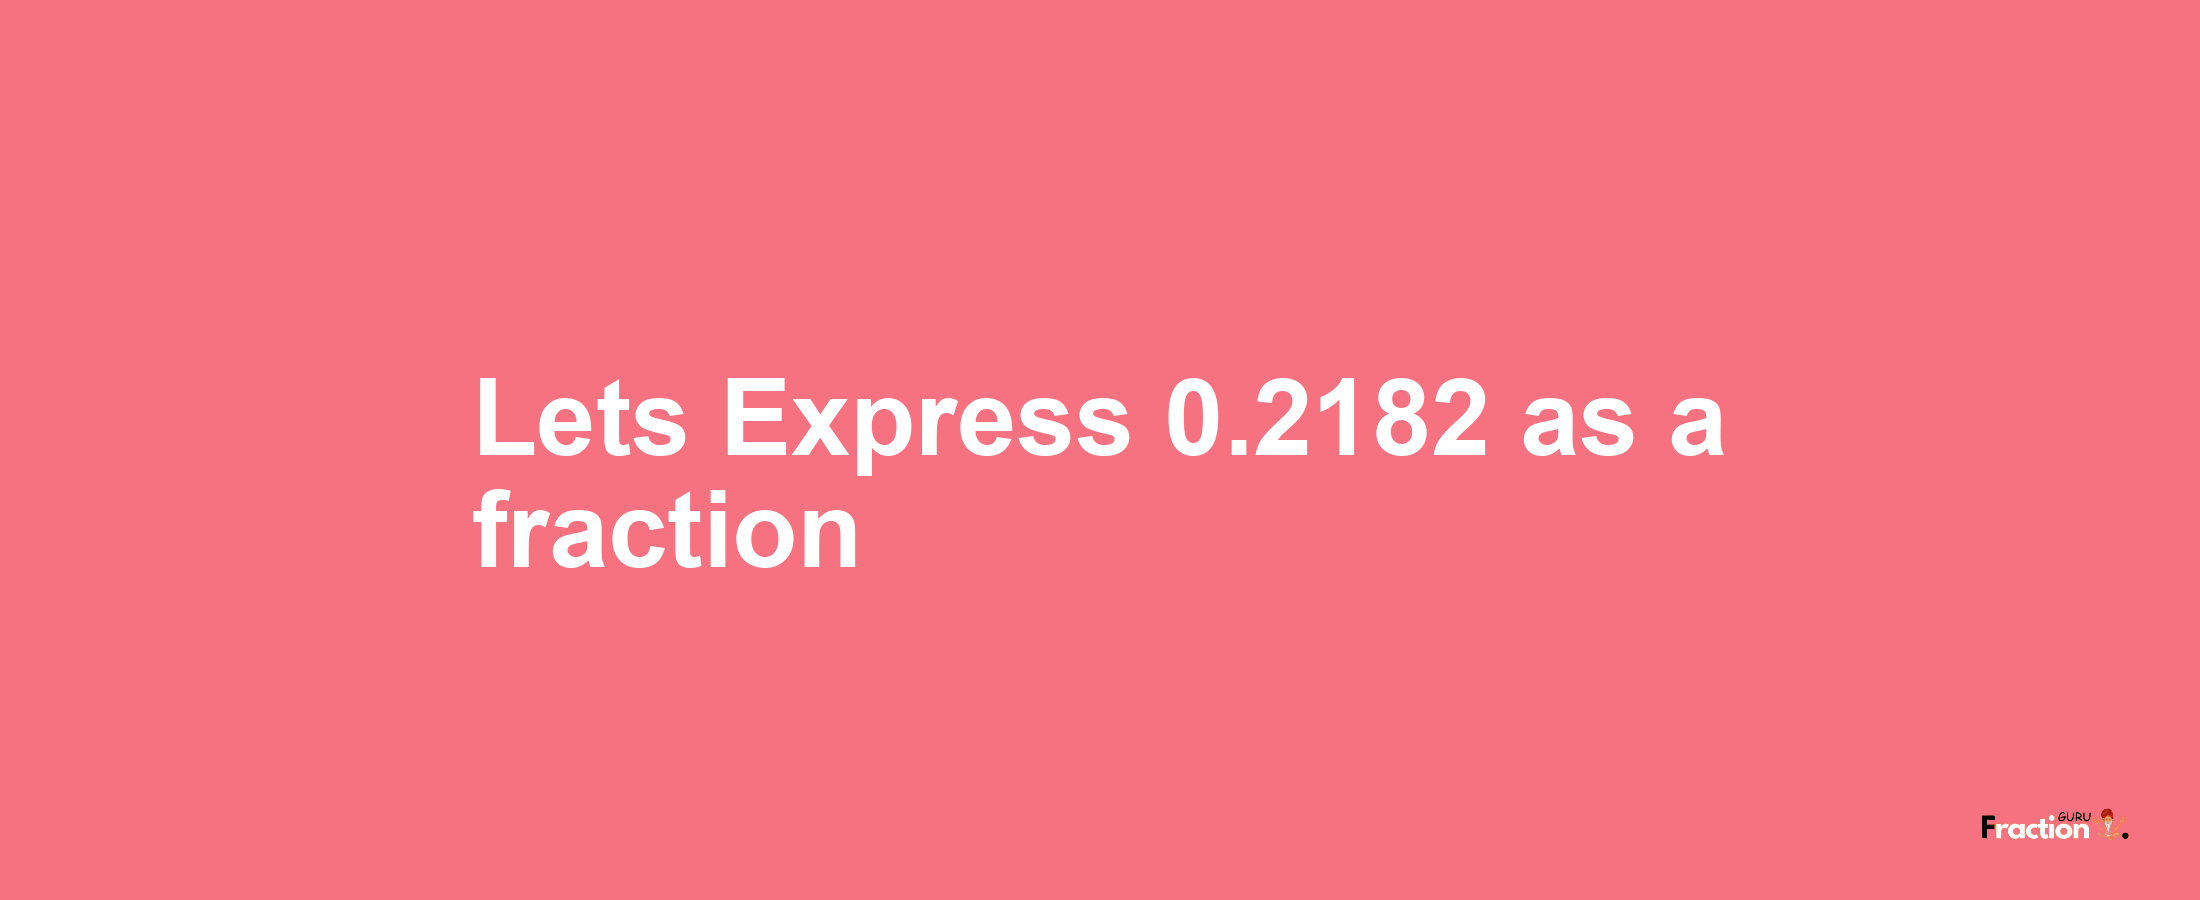 Lets Express 0.2182 as afraction